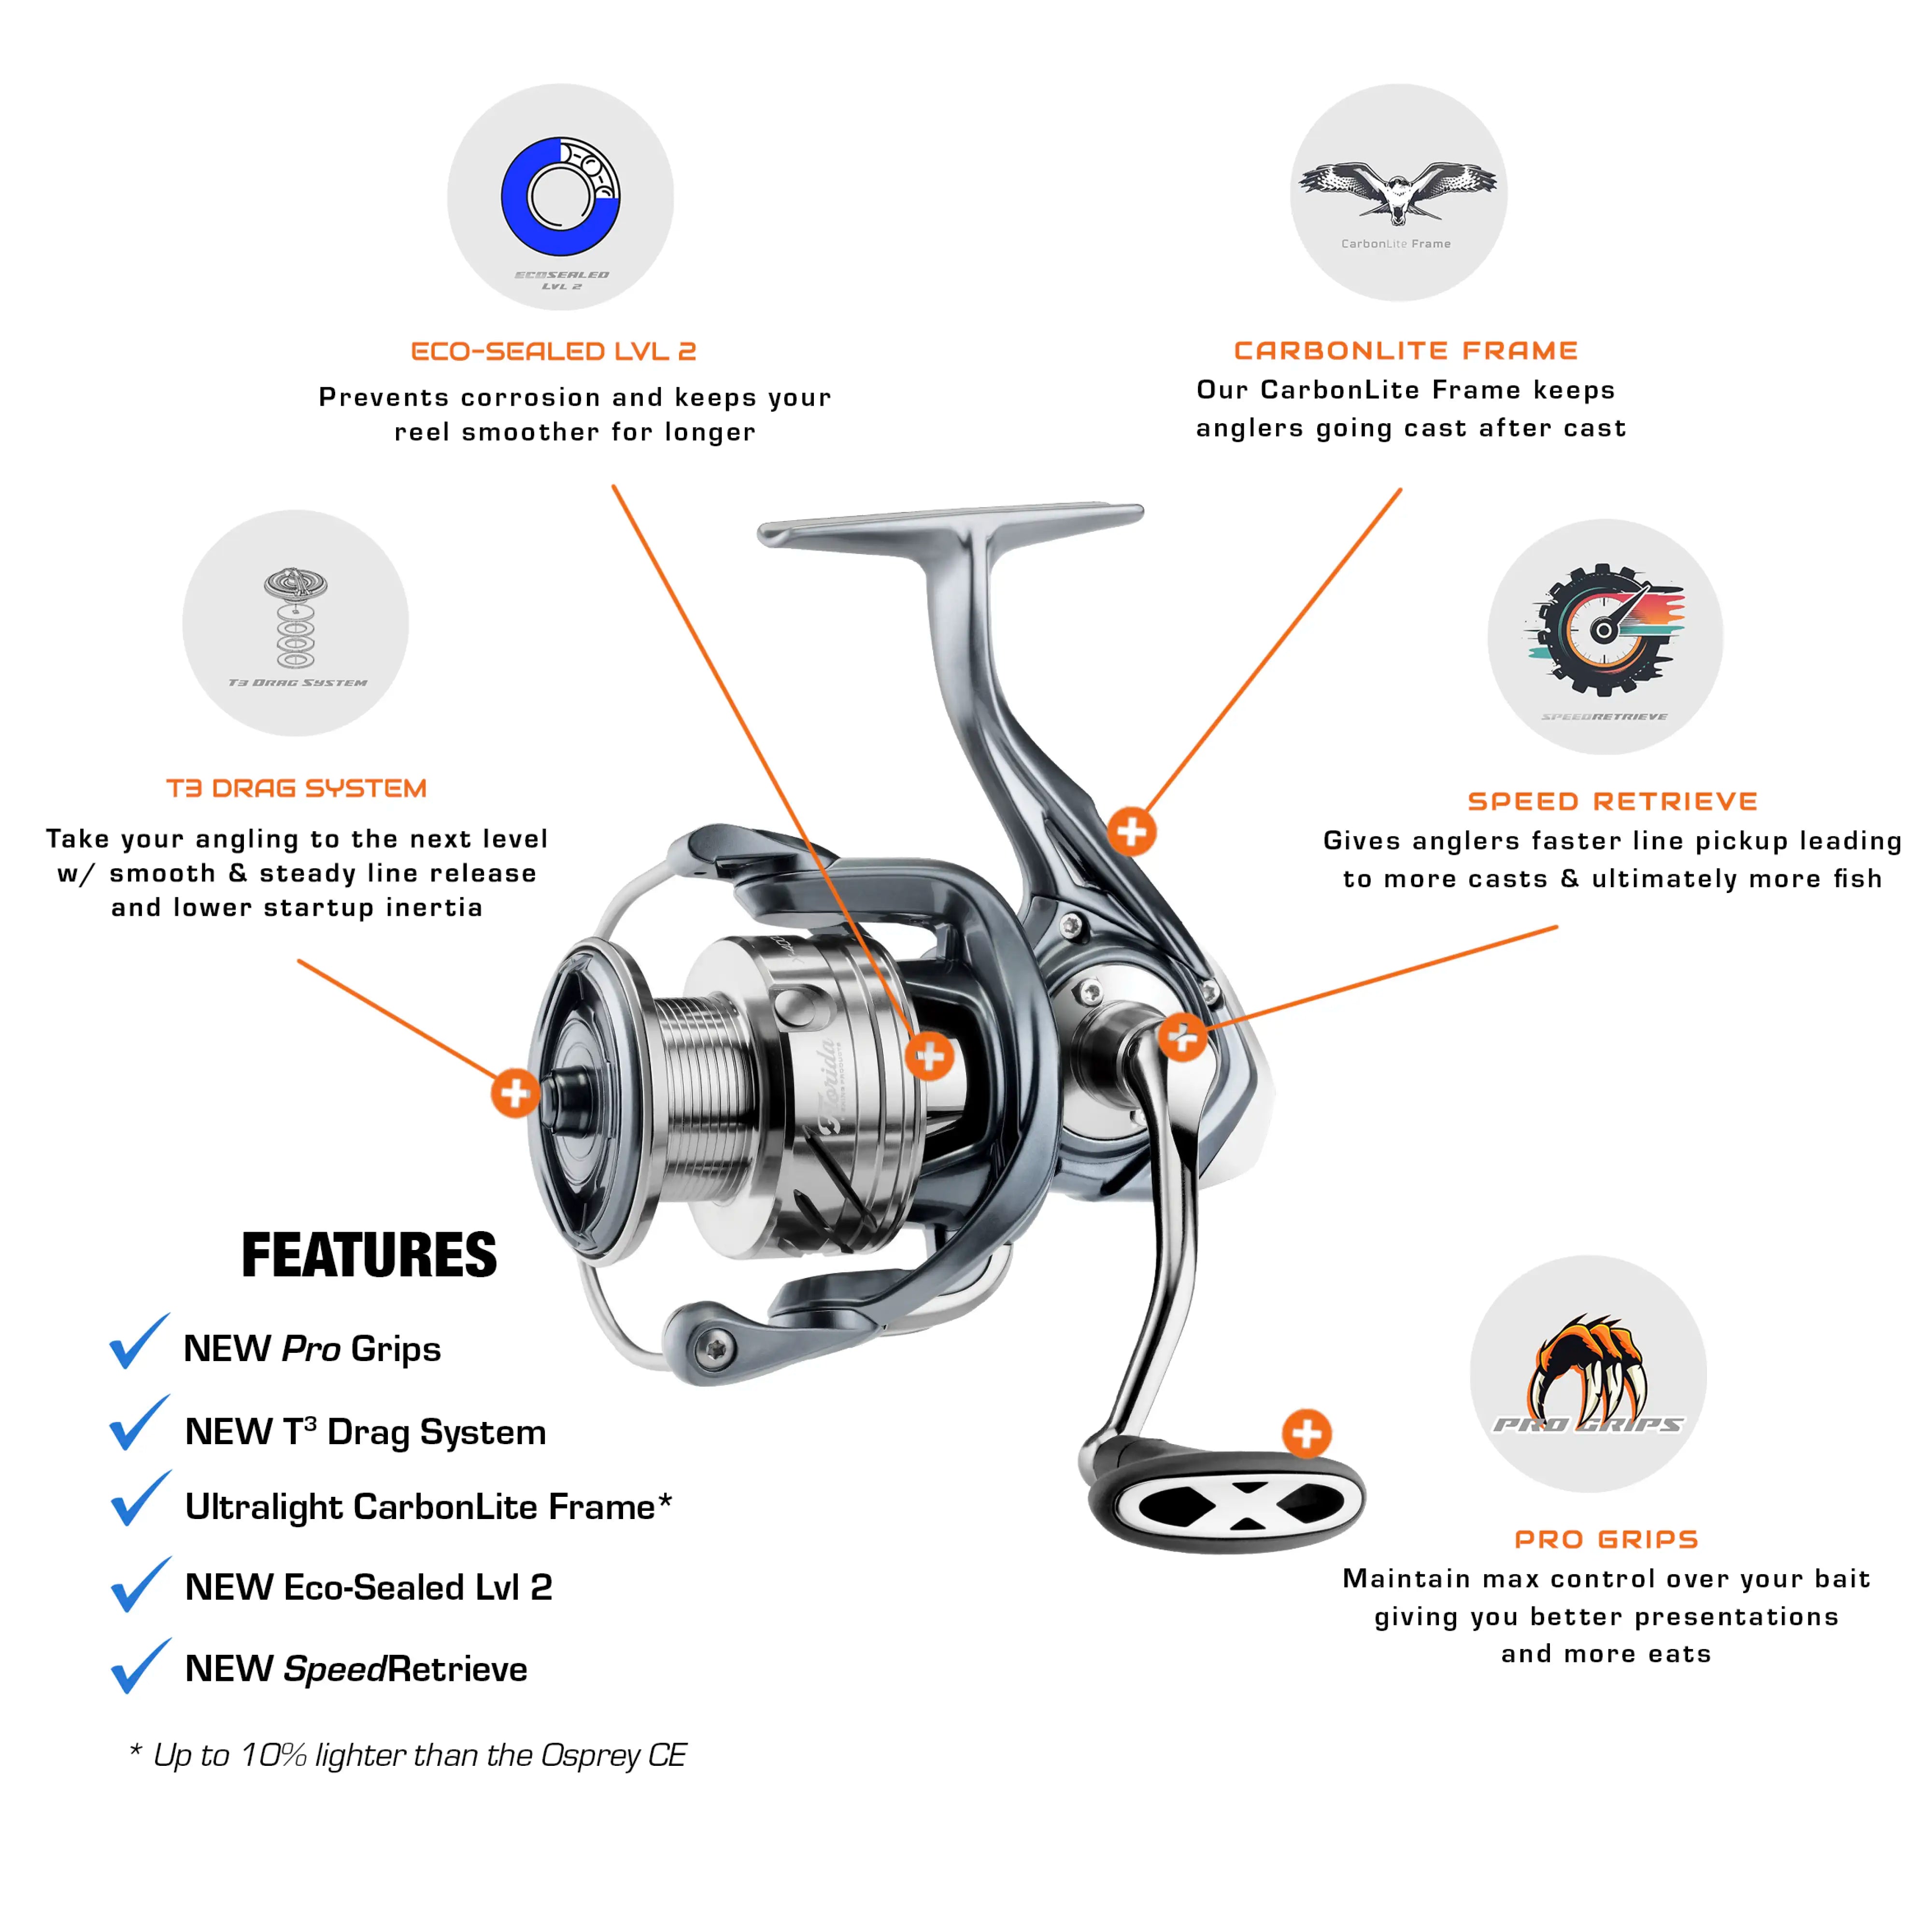 BUY IT! BUDGET Spinning Reel Review - Sea Knight Rapid 5000